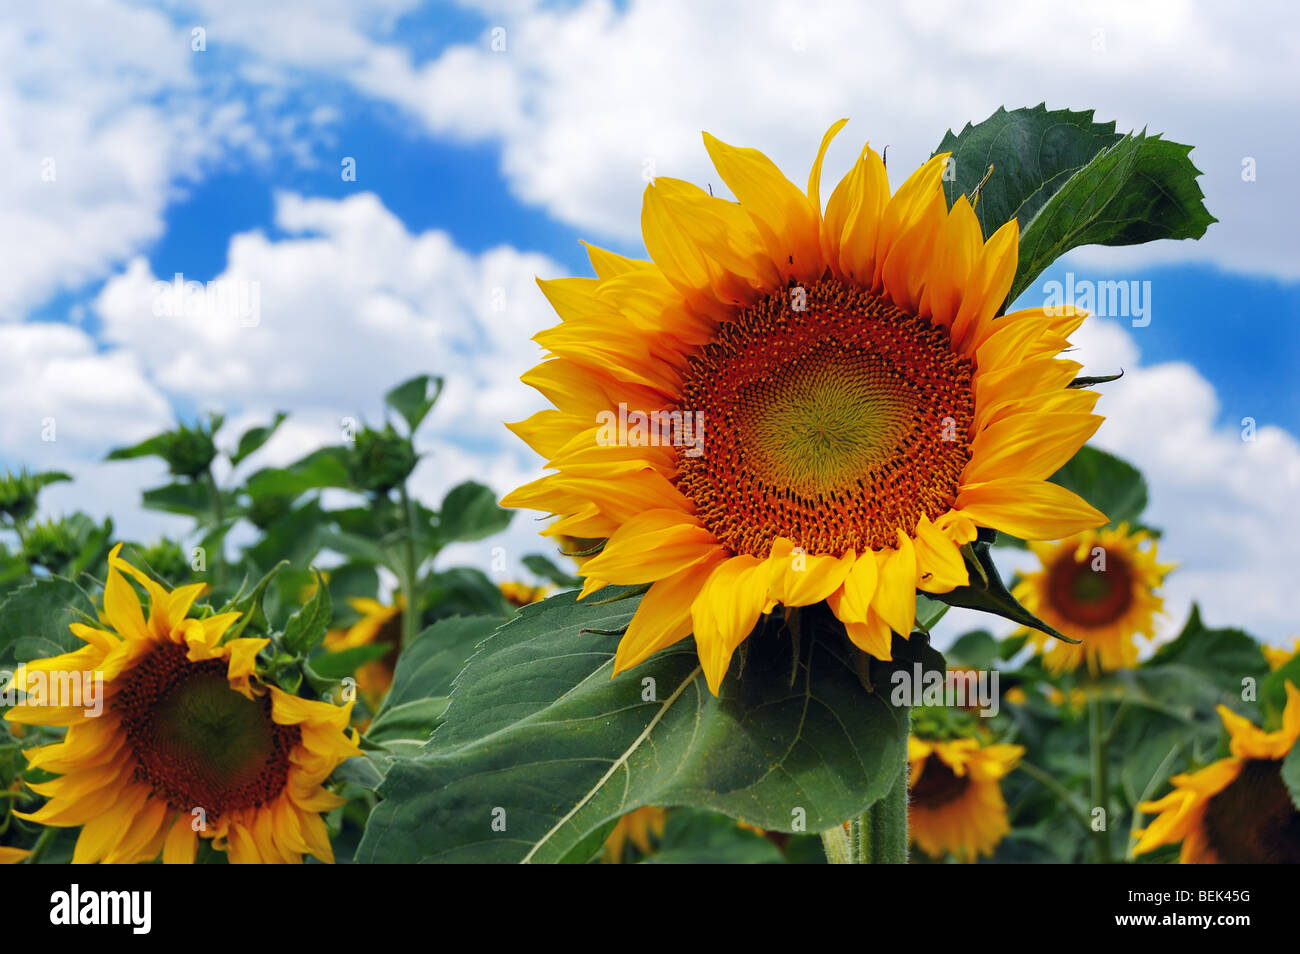 Sunflowers on a background of the cloudy blue sky Stock Photo